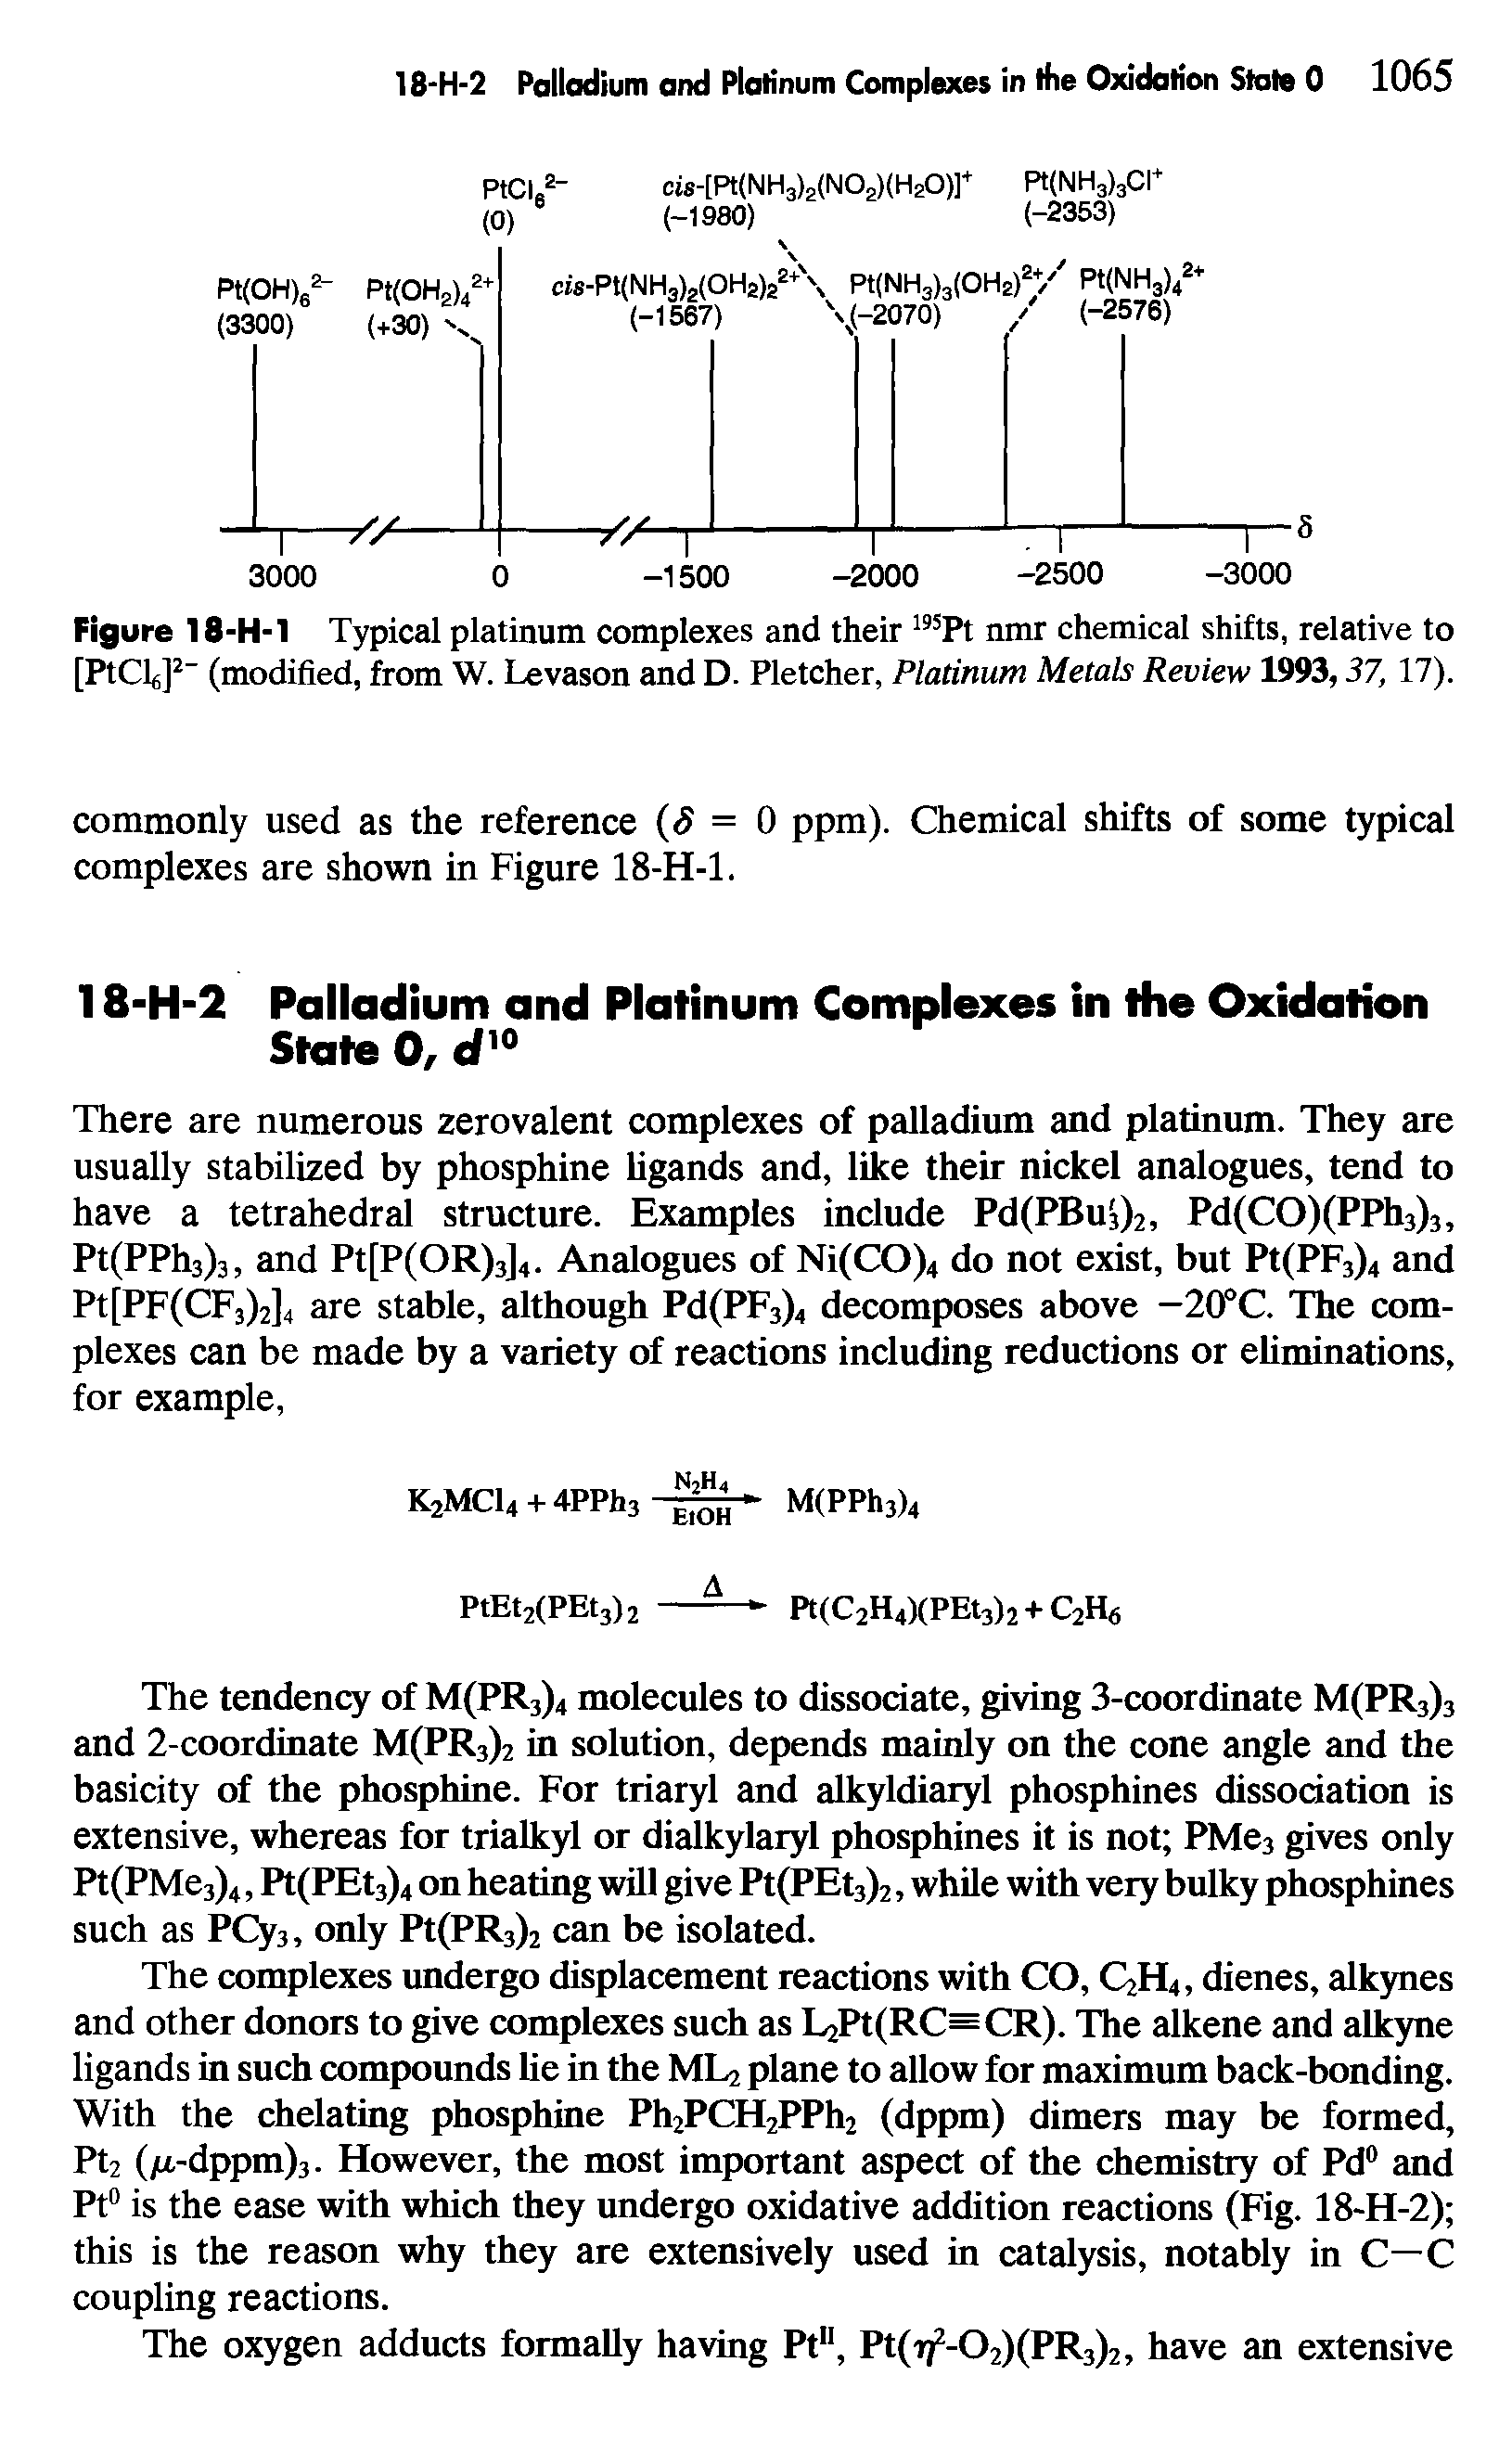 Figure 18-H-l Typical platinum complexes and their 195Pt nmr chemical shifts, relative to [PtClfi]2 (modified, from W. Levason and D. Pletcher, Platinum Metals Review 1993,37, 17).